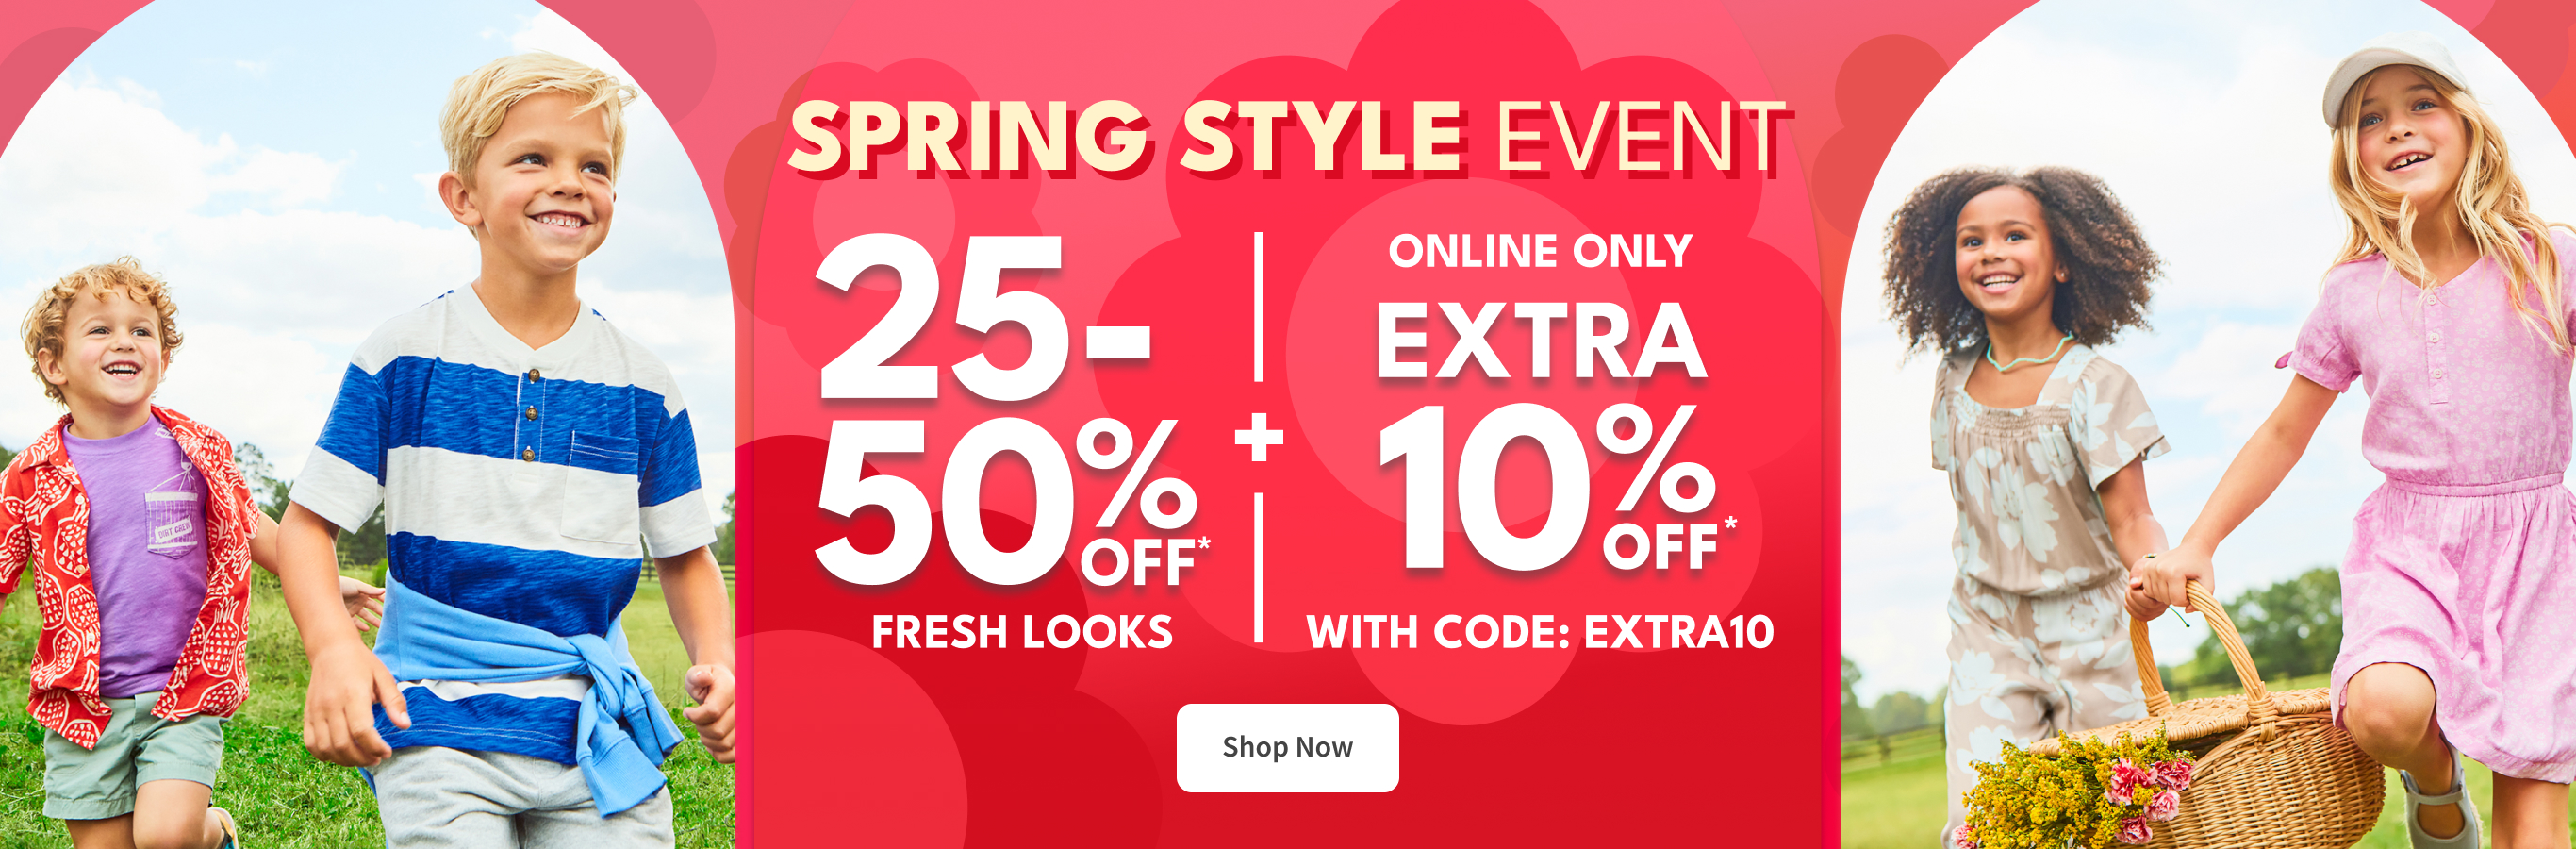 spring style event|25-50% off*| fresh looks | online only extra 10% off* | with code: extra10 |shop now 